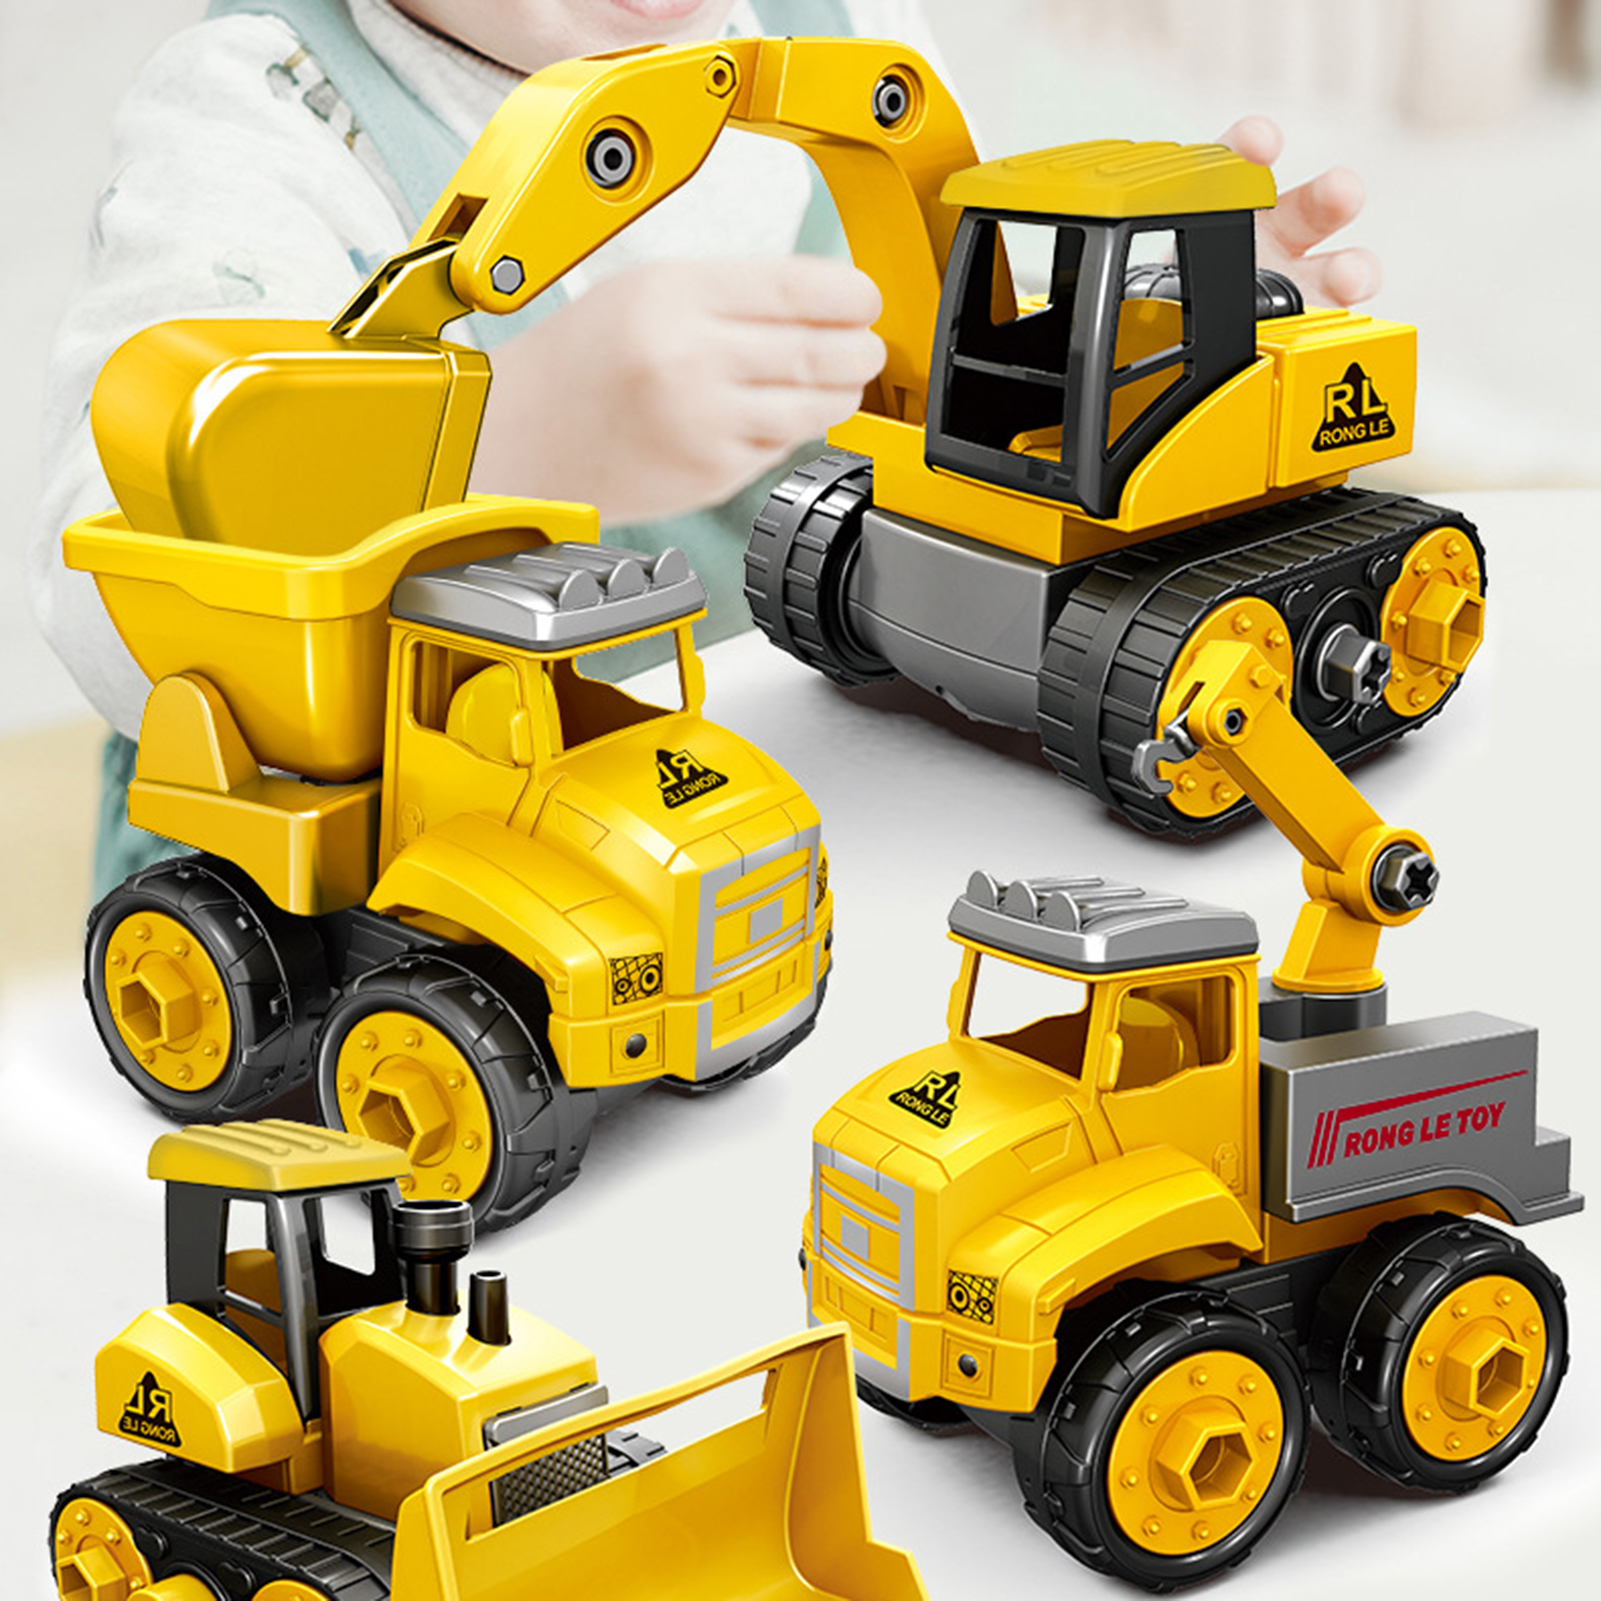 Pnellth Engineering Toy Detachable Assembly Easily Plastic Construction Vehicles Toy for Kids - image 3 of 8